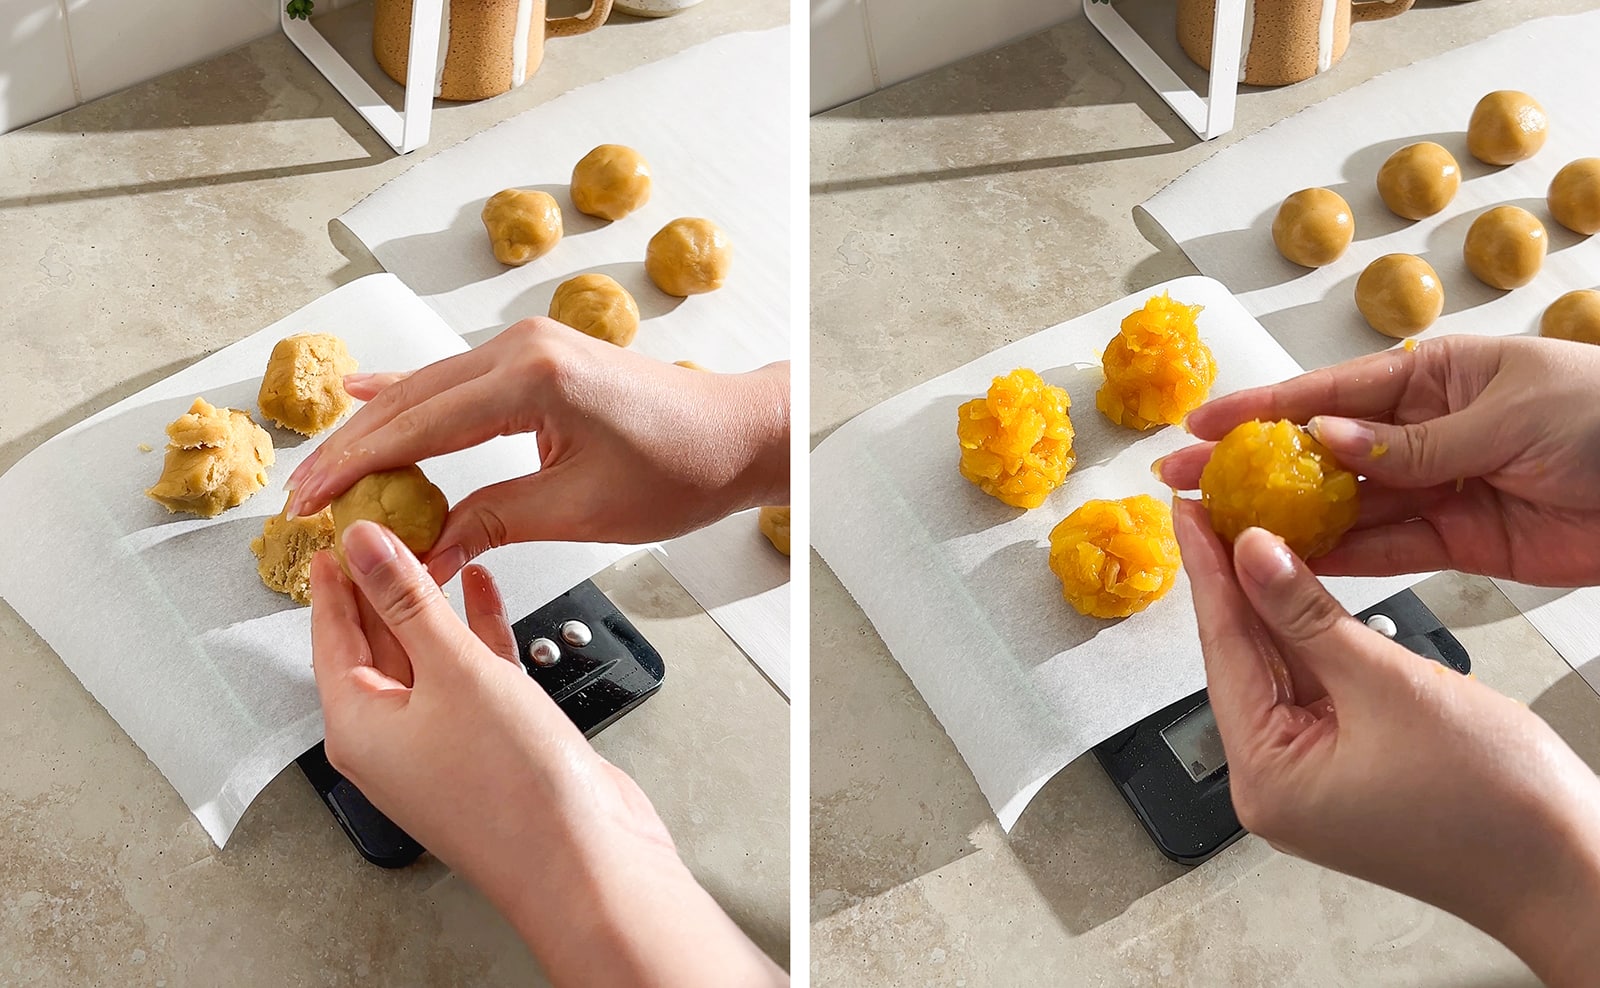 Left to right: hands shaping ball of dough, hands shaping ball of pineapple filling.